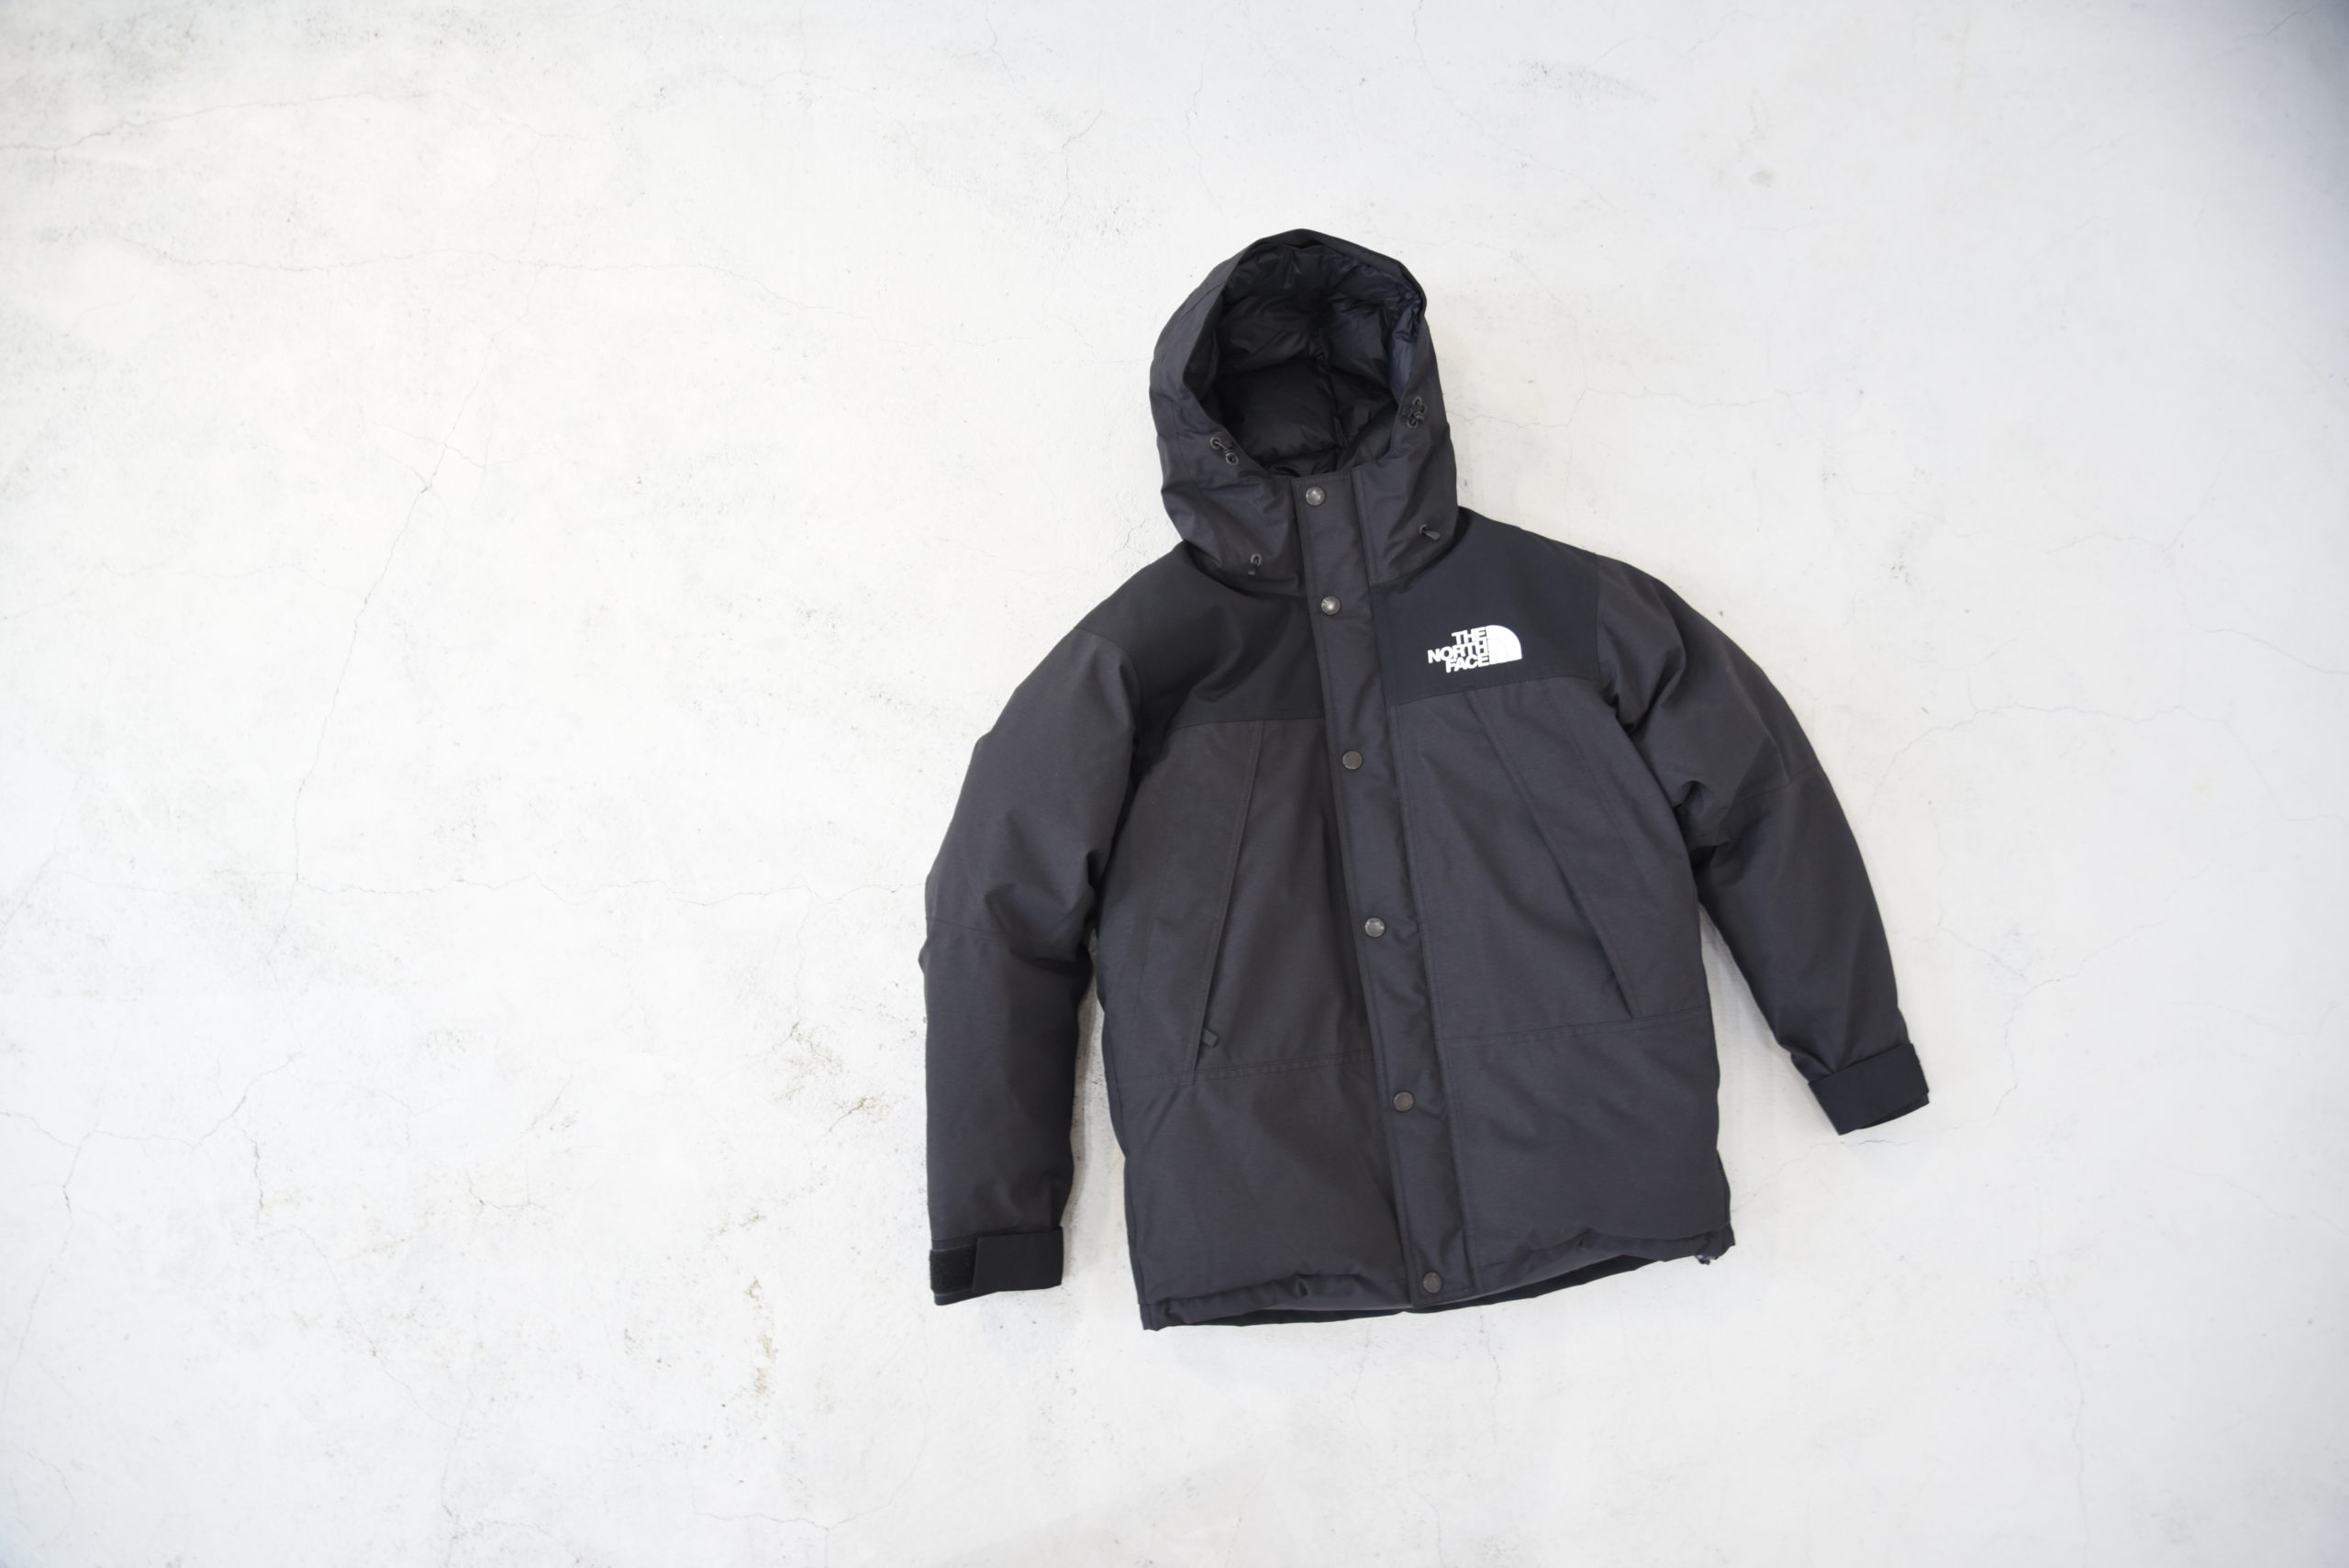 Recommended item　Vol. 5　”Mountain Down Jacket”